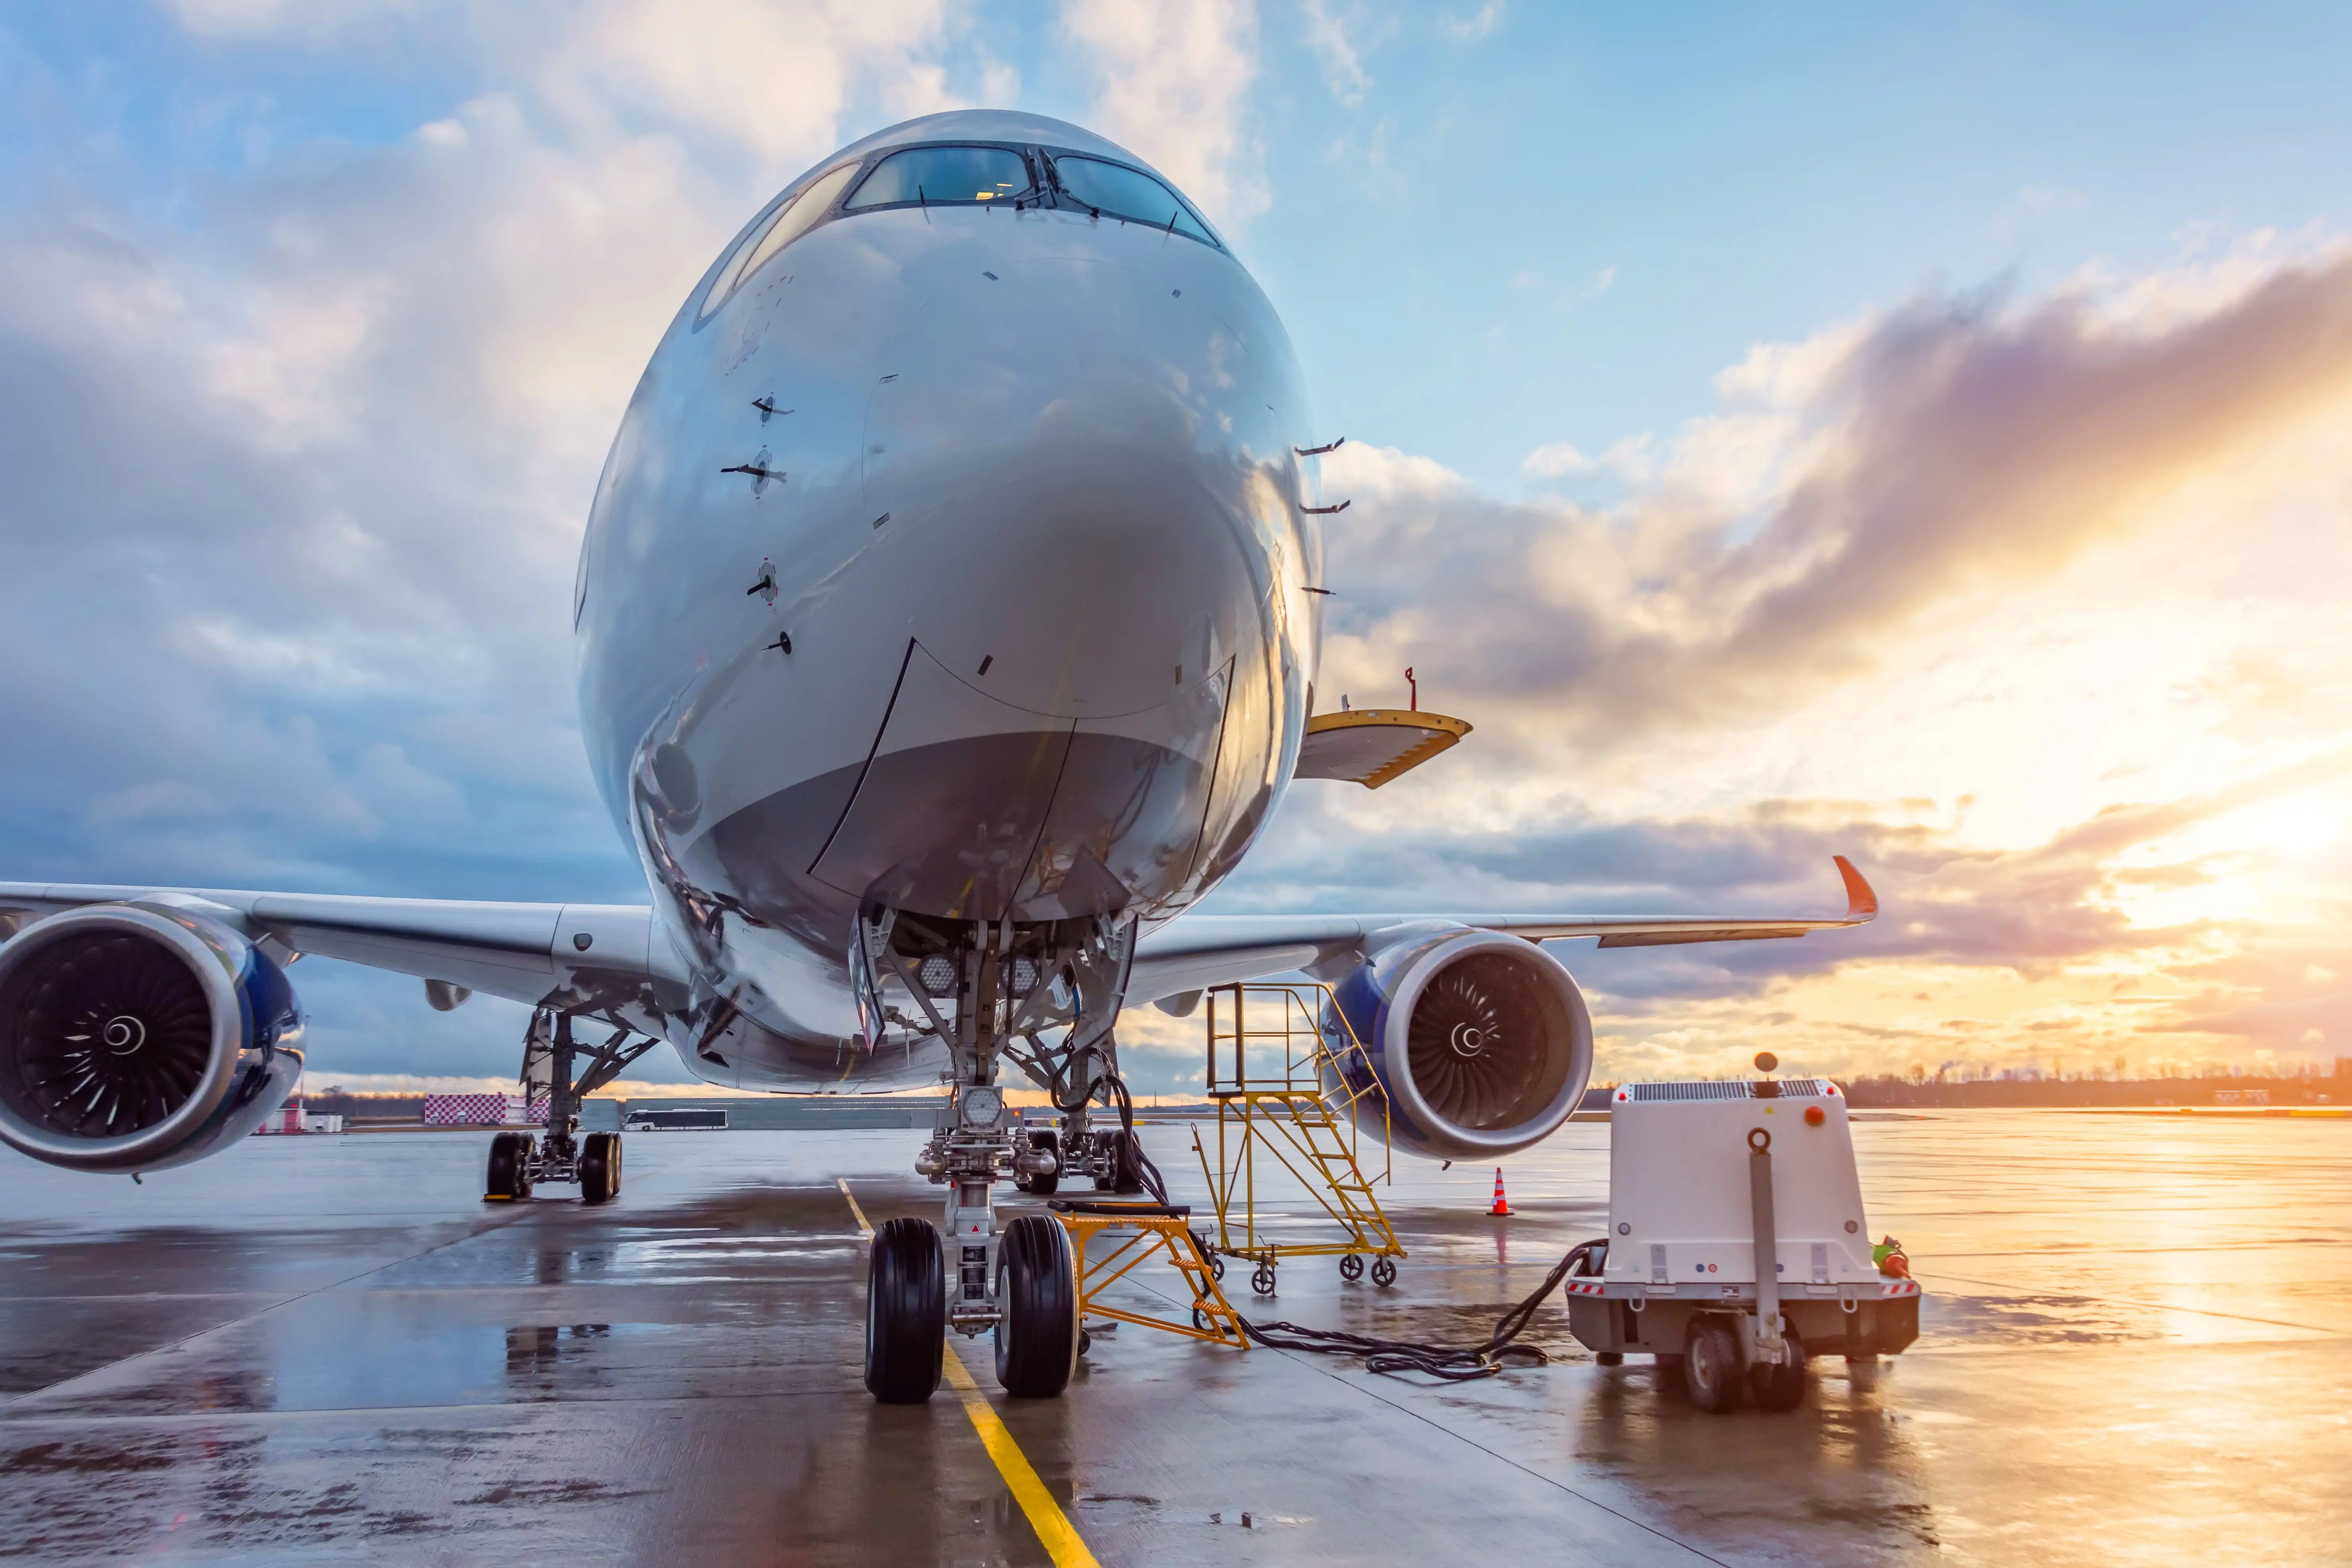 Important Factors to Consider while hiring Air Freight Services